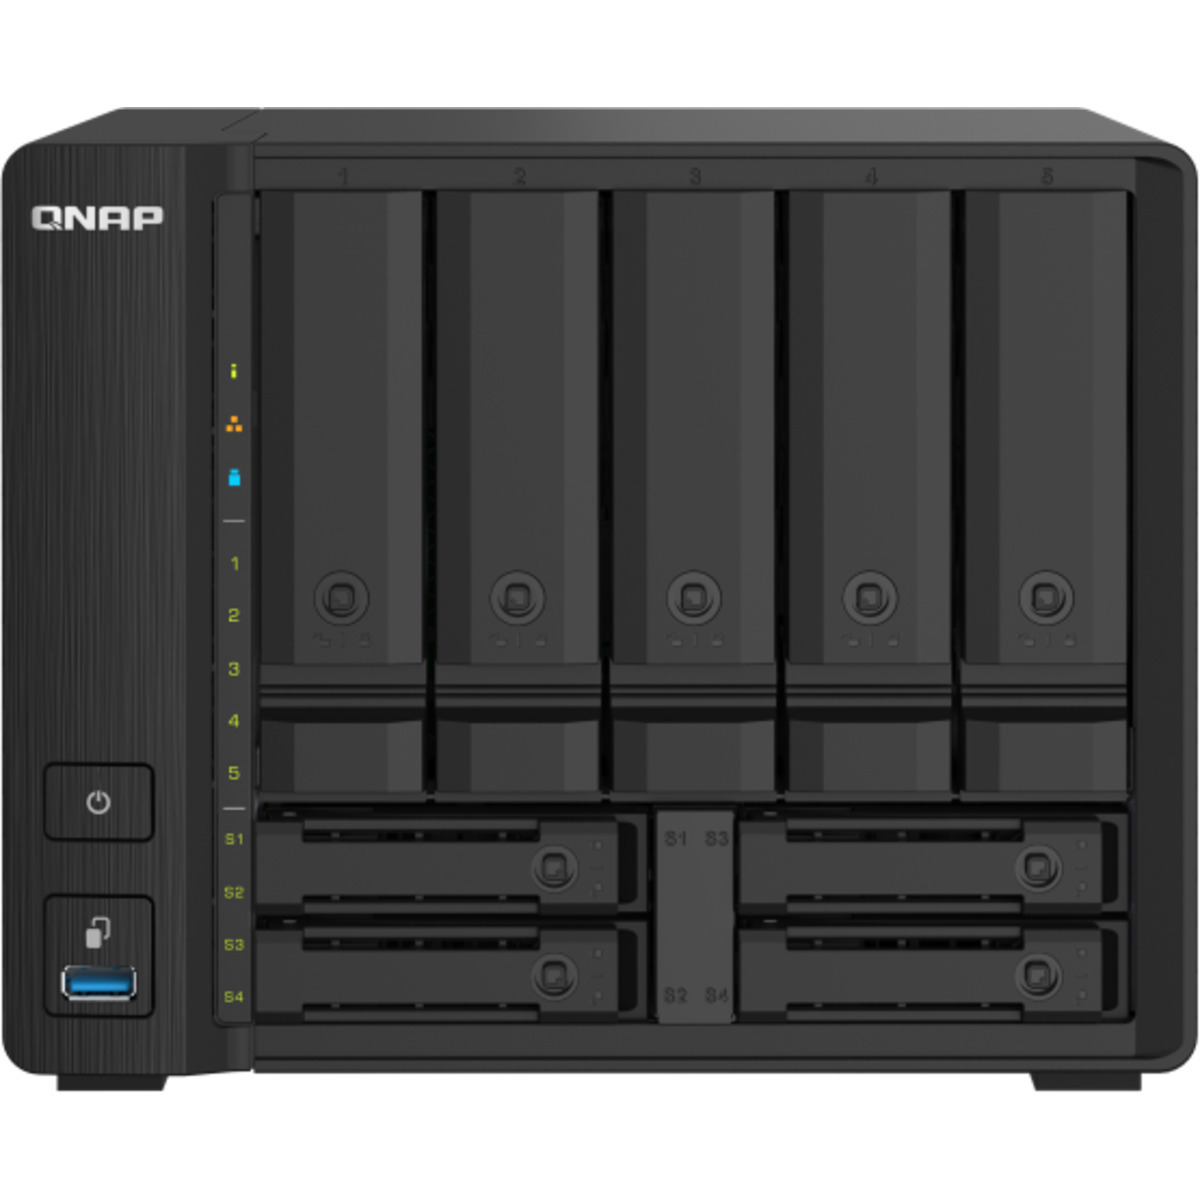 QNAP TS-932PX 5tb 5+4-Bay Desktop Multimedia / Power User / Business NAS - Network Attached Storage Device 5x1tb Crucial MX500 CT1000MX500SSD1 2.5 560/510MB/s SATA 6Gb/s SSD CONSUMER Class Drives Installed - Burn-In Tested - FREE RAM UPGRADE TS-932PX